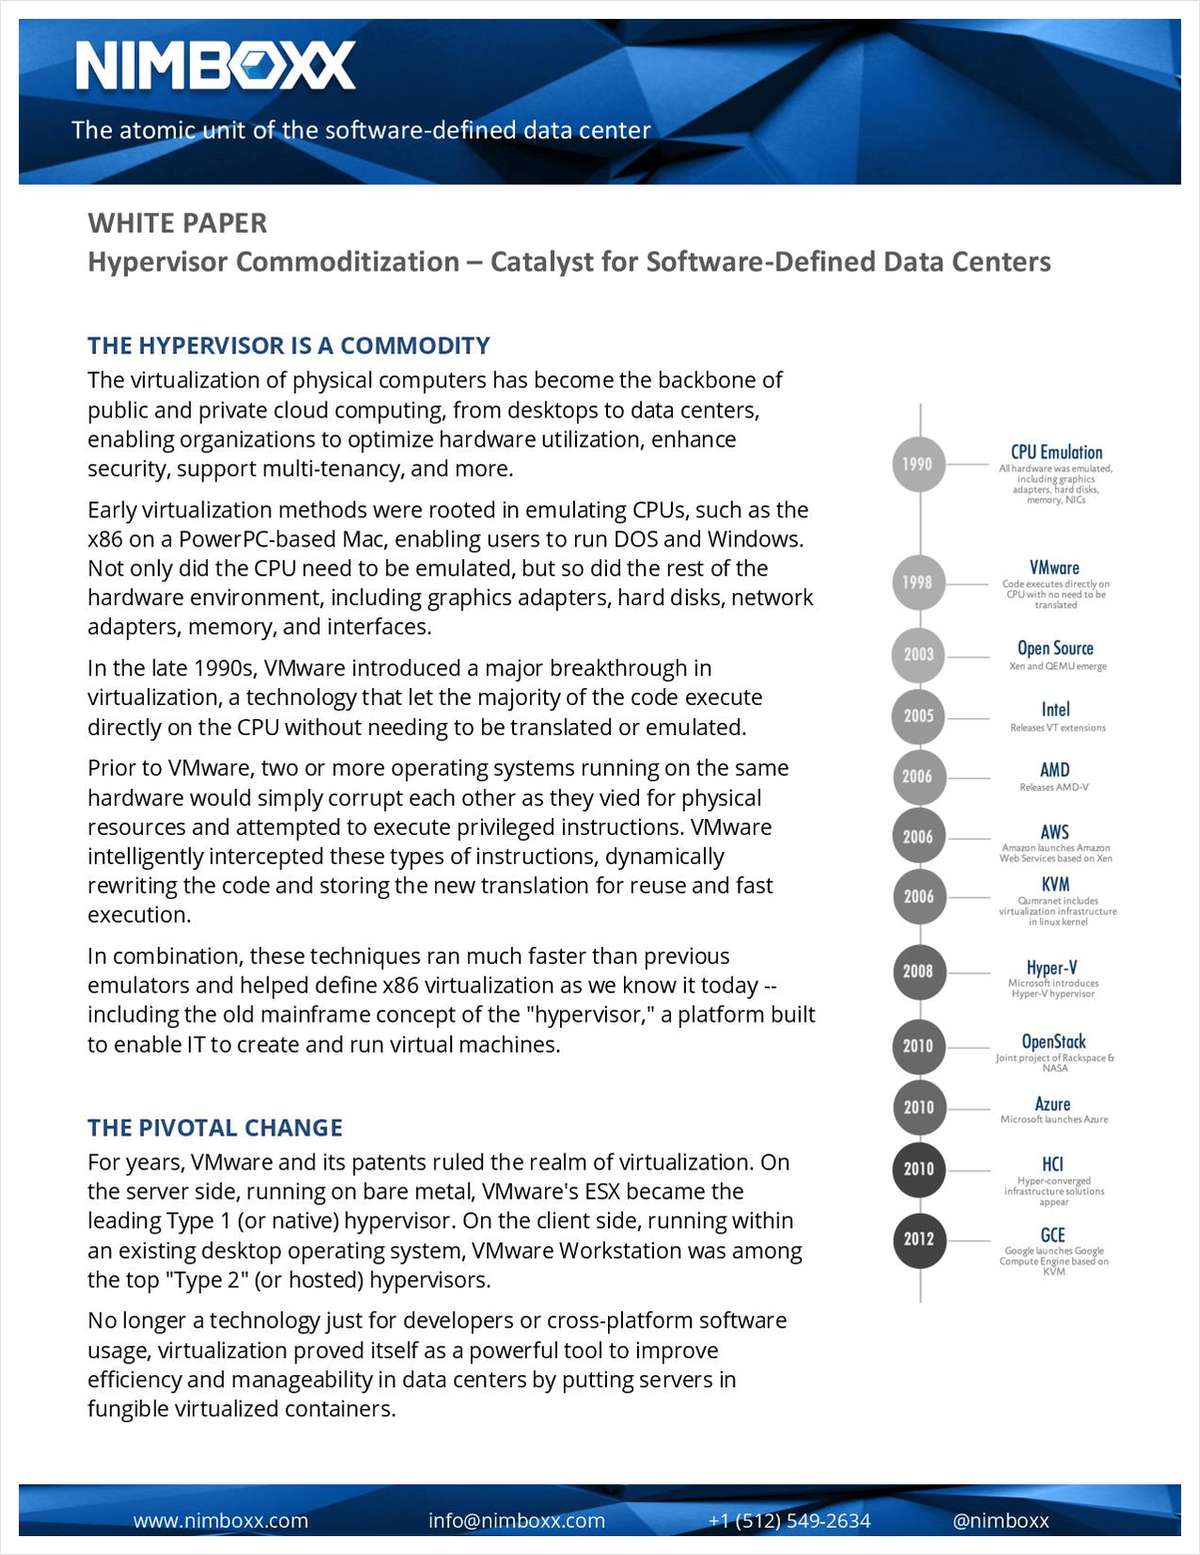 Hypervisor Commoditization: Catalyst for Software-Defined Data Centers